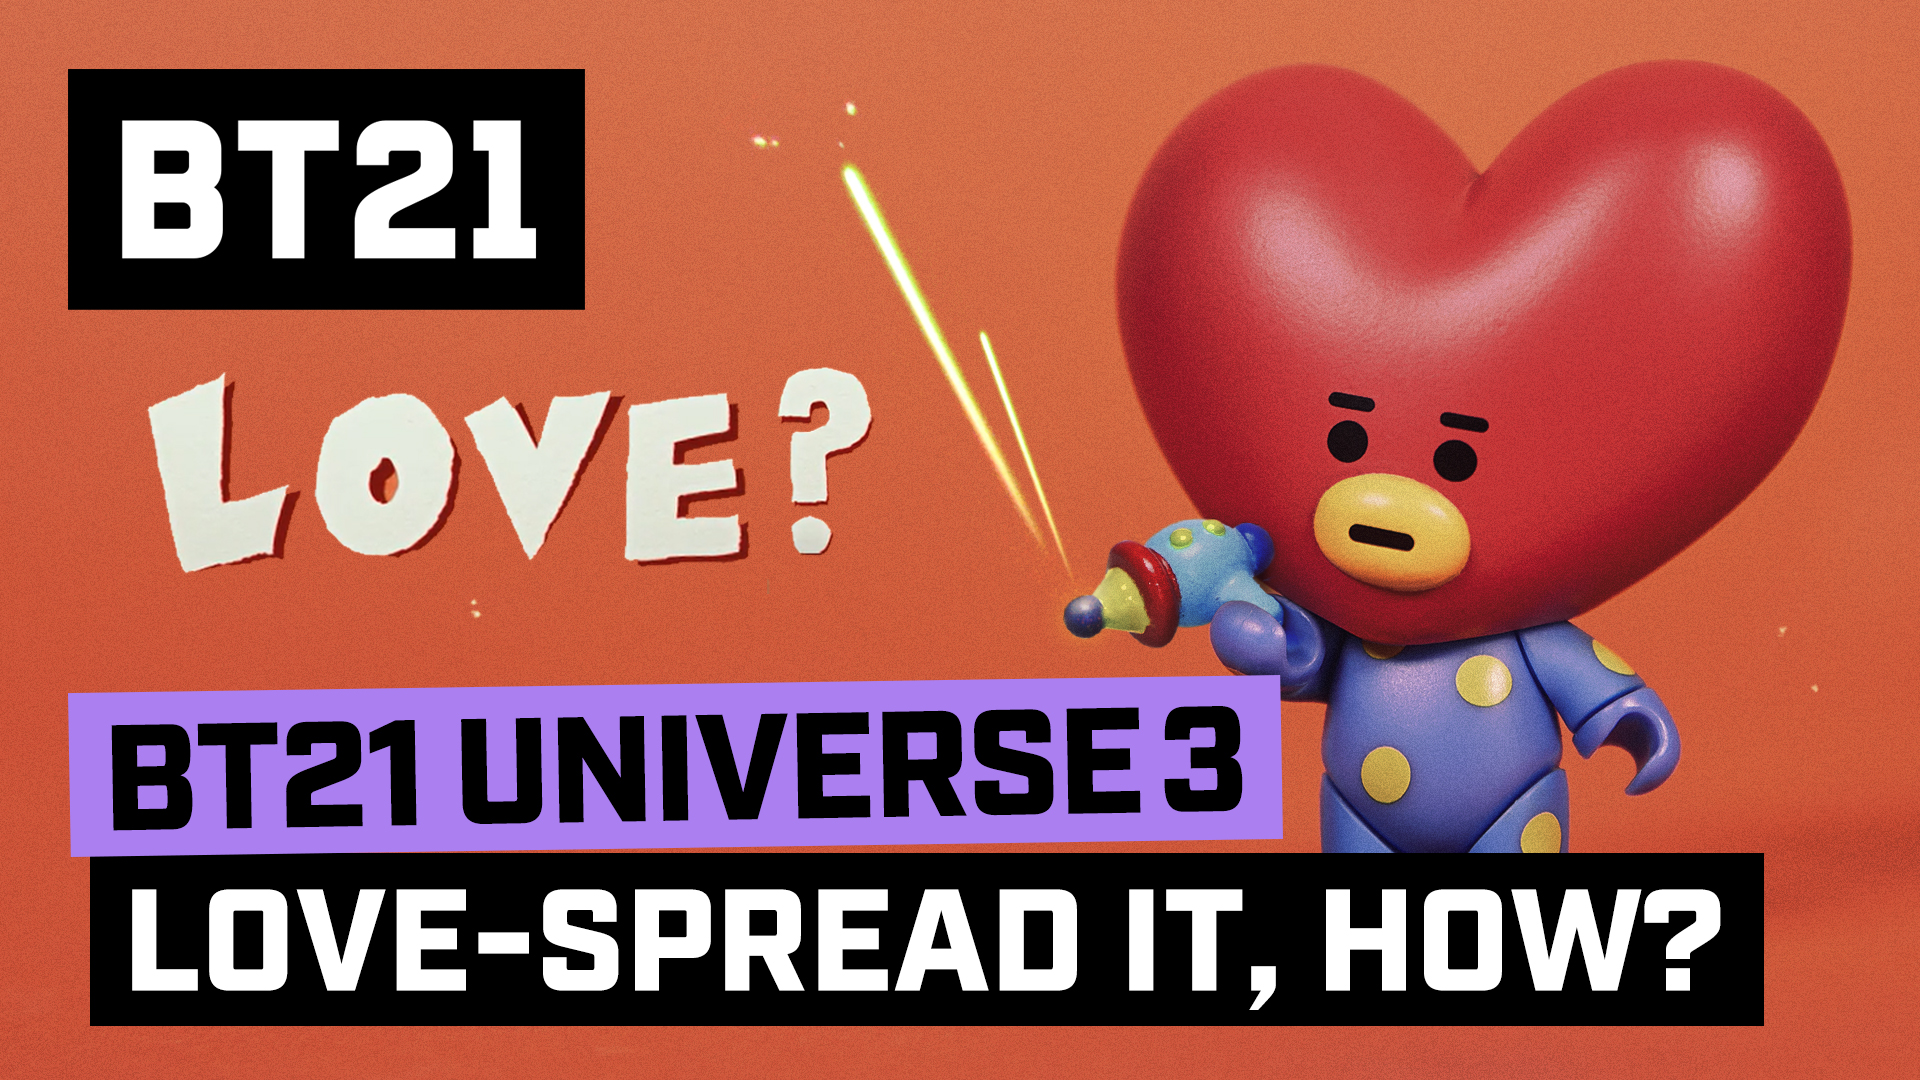 BT21 UNIVERSE 3 ANIMATION EP.06 - Love–Spread It, How?